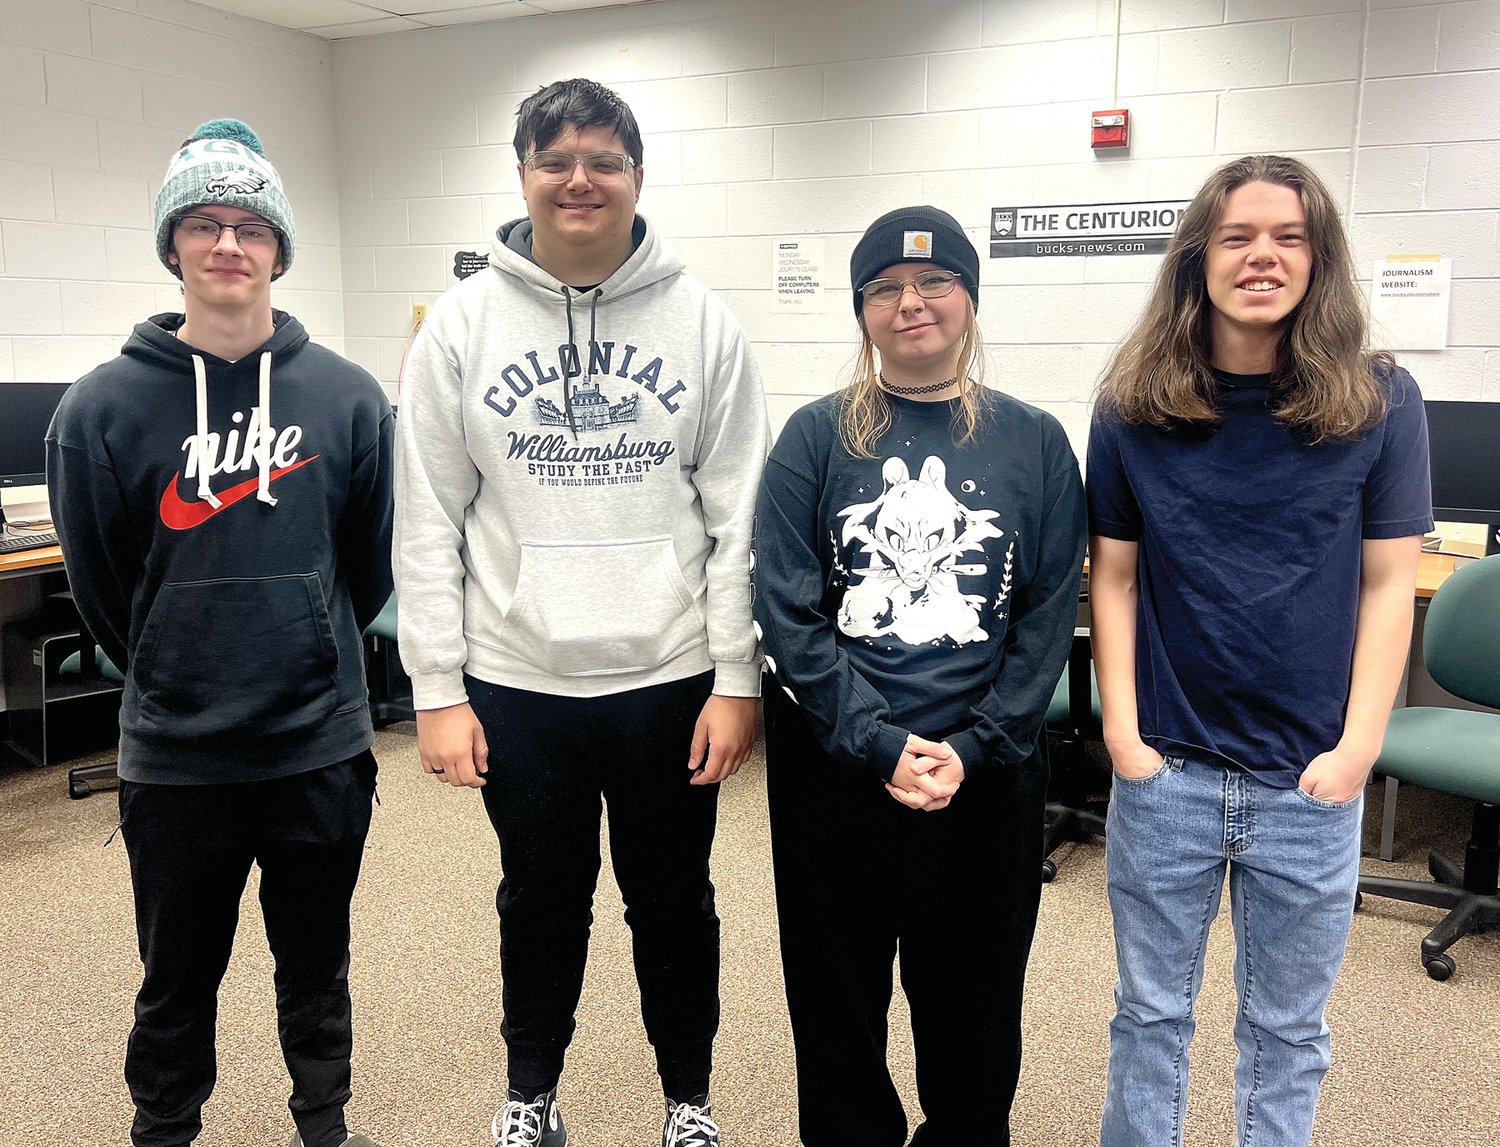 From left are: Centurion staffers Colin Riccardi, Parker DeStefano, Max Mower and Lucas Darling.